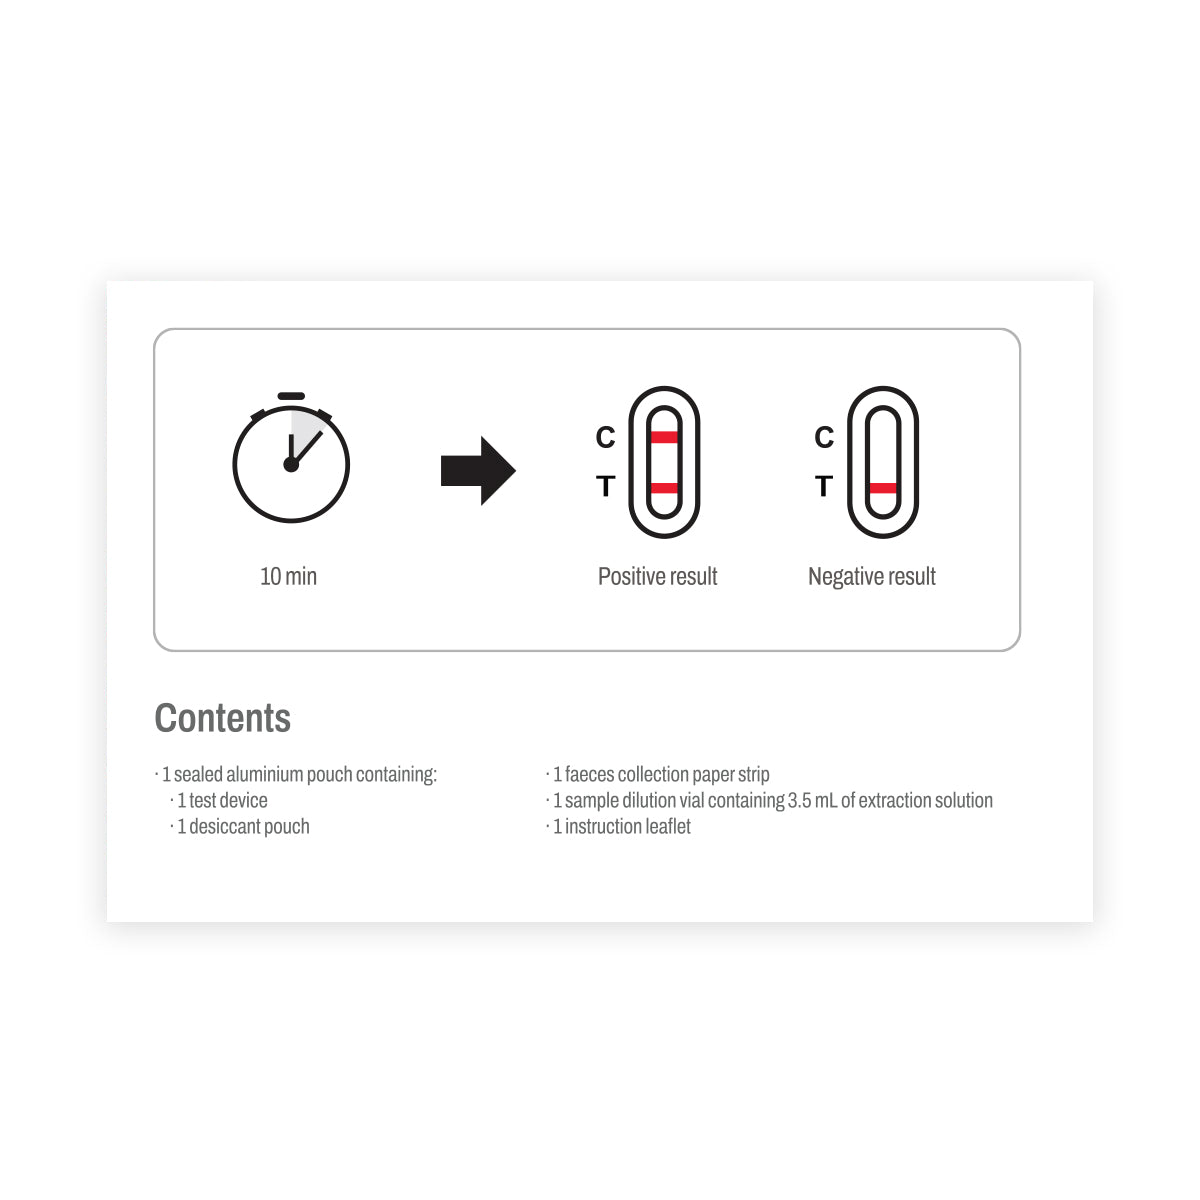 MyBio Calprotectin-Check Easy to Use At Home Self Test instructions